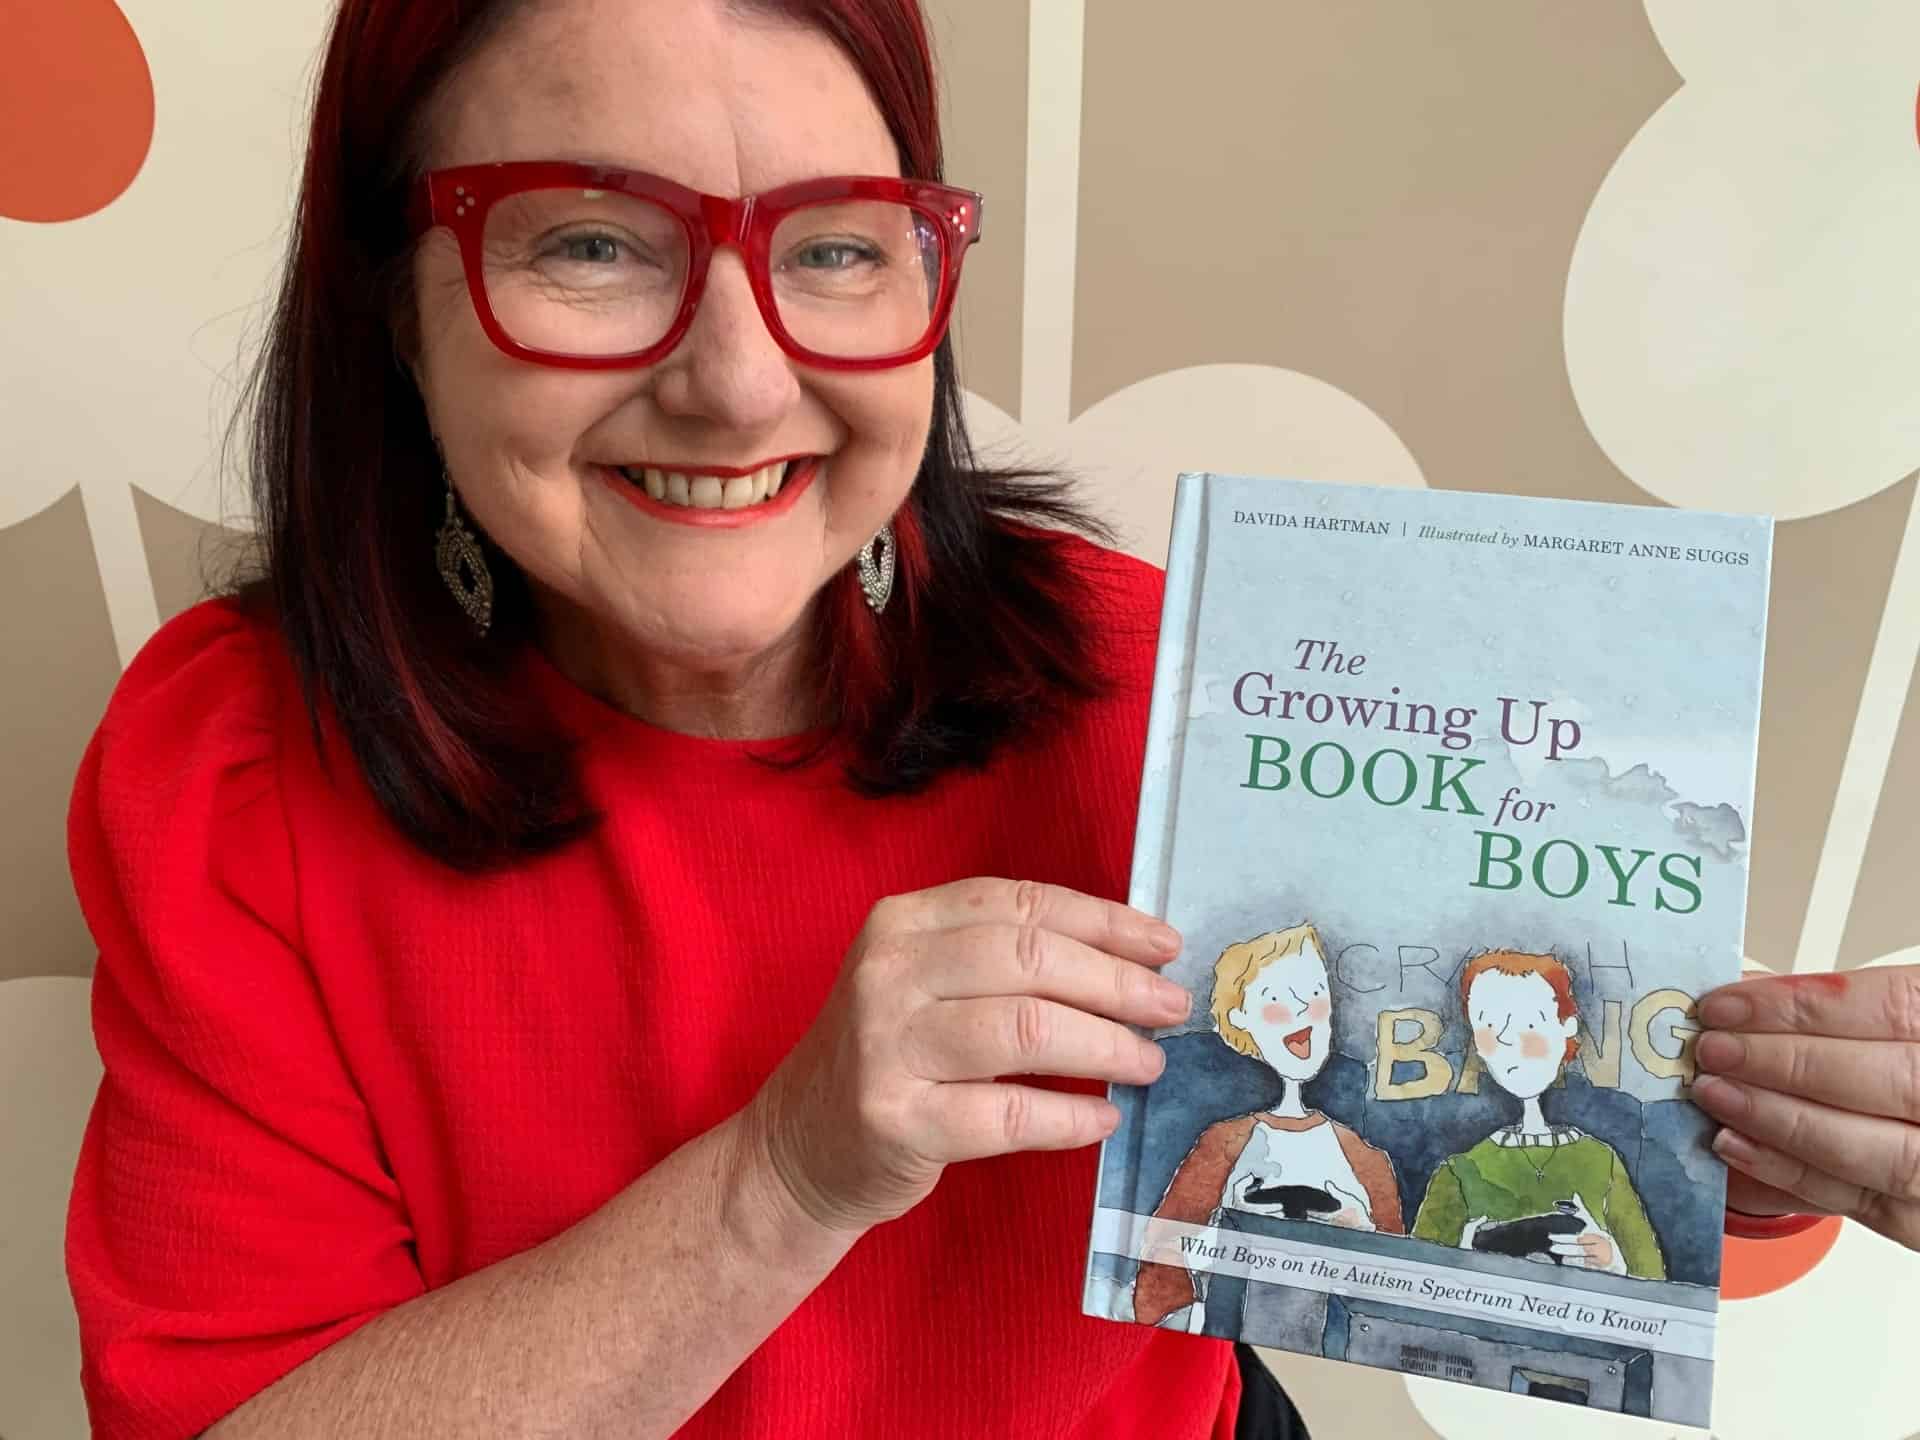 The Growing Up Book for Boys- Book review by Rowena Thomas | 'Amazing Me'